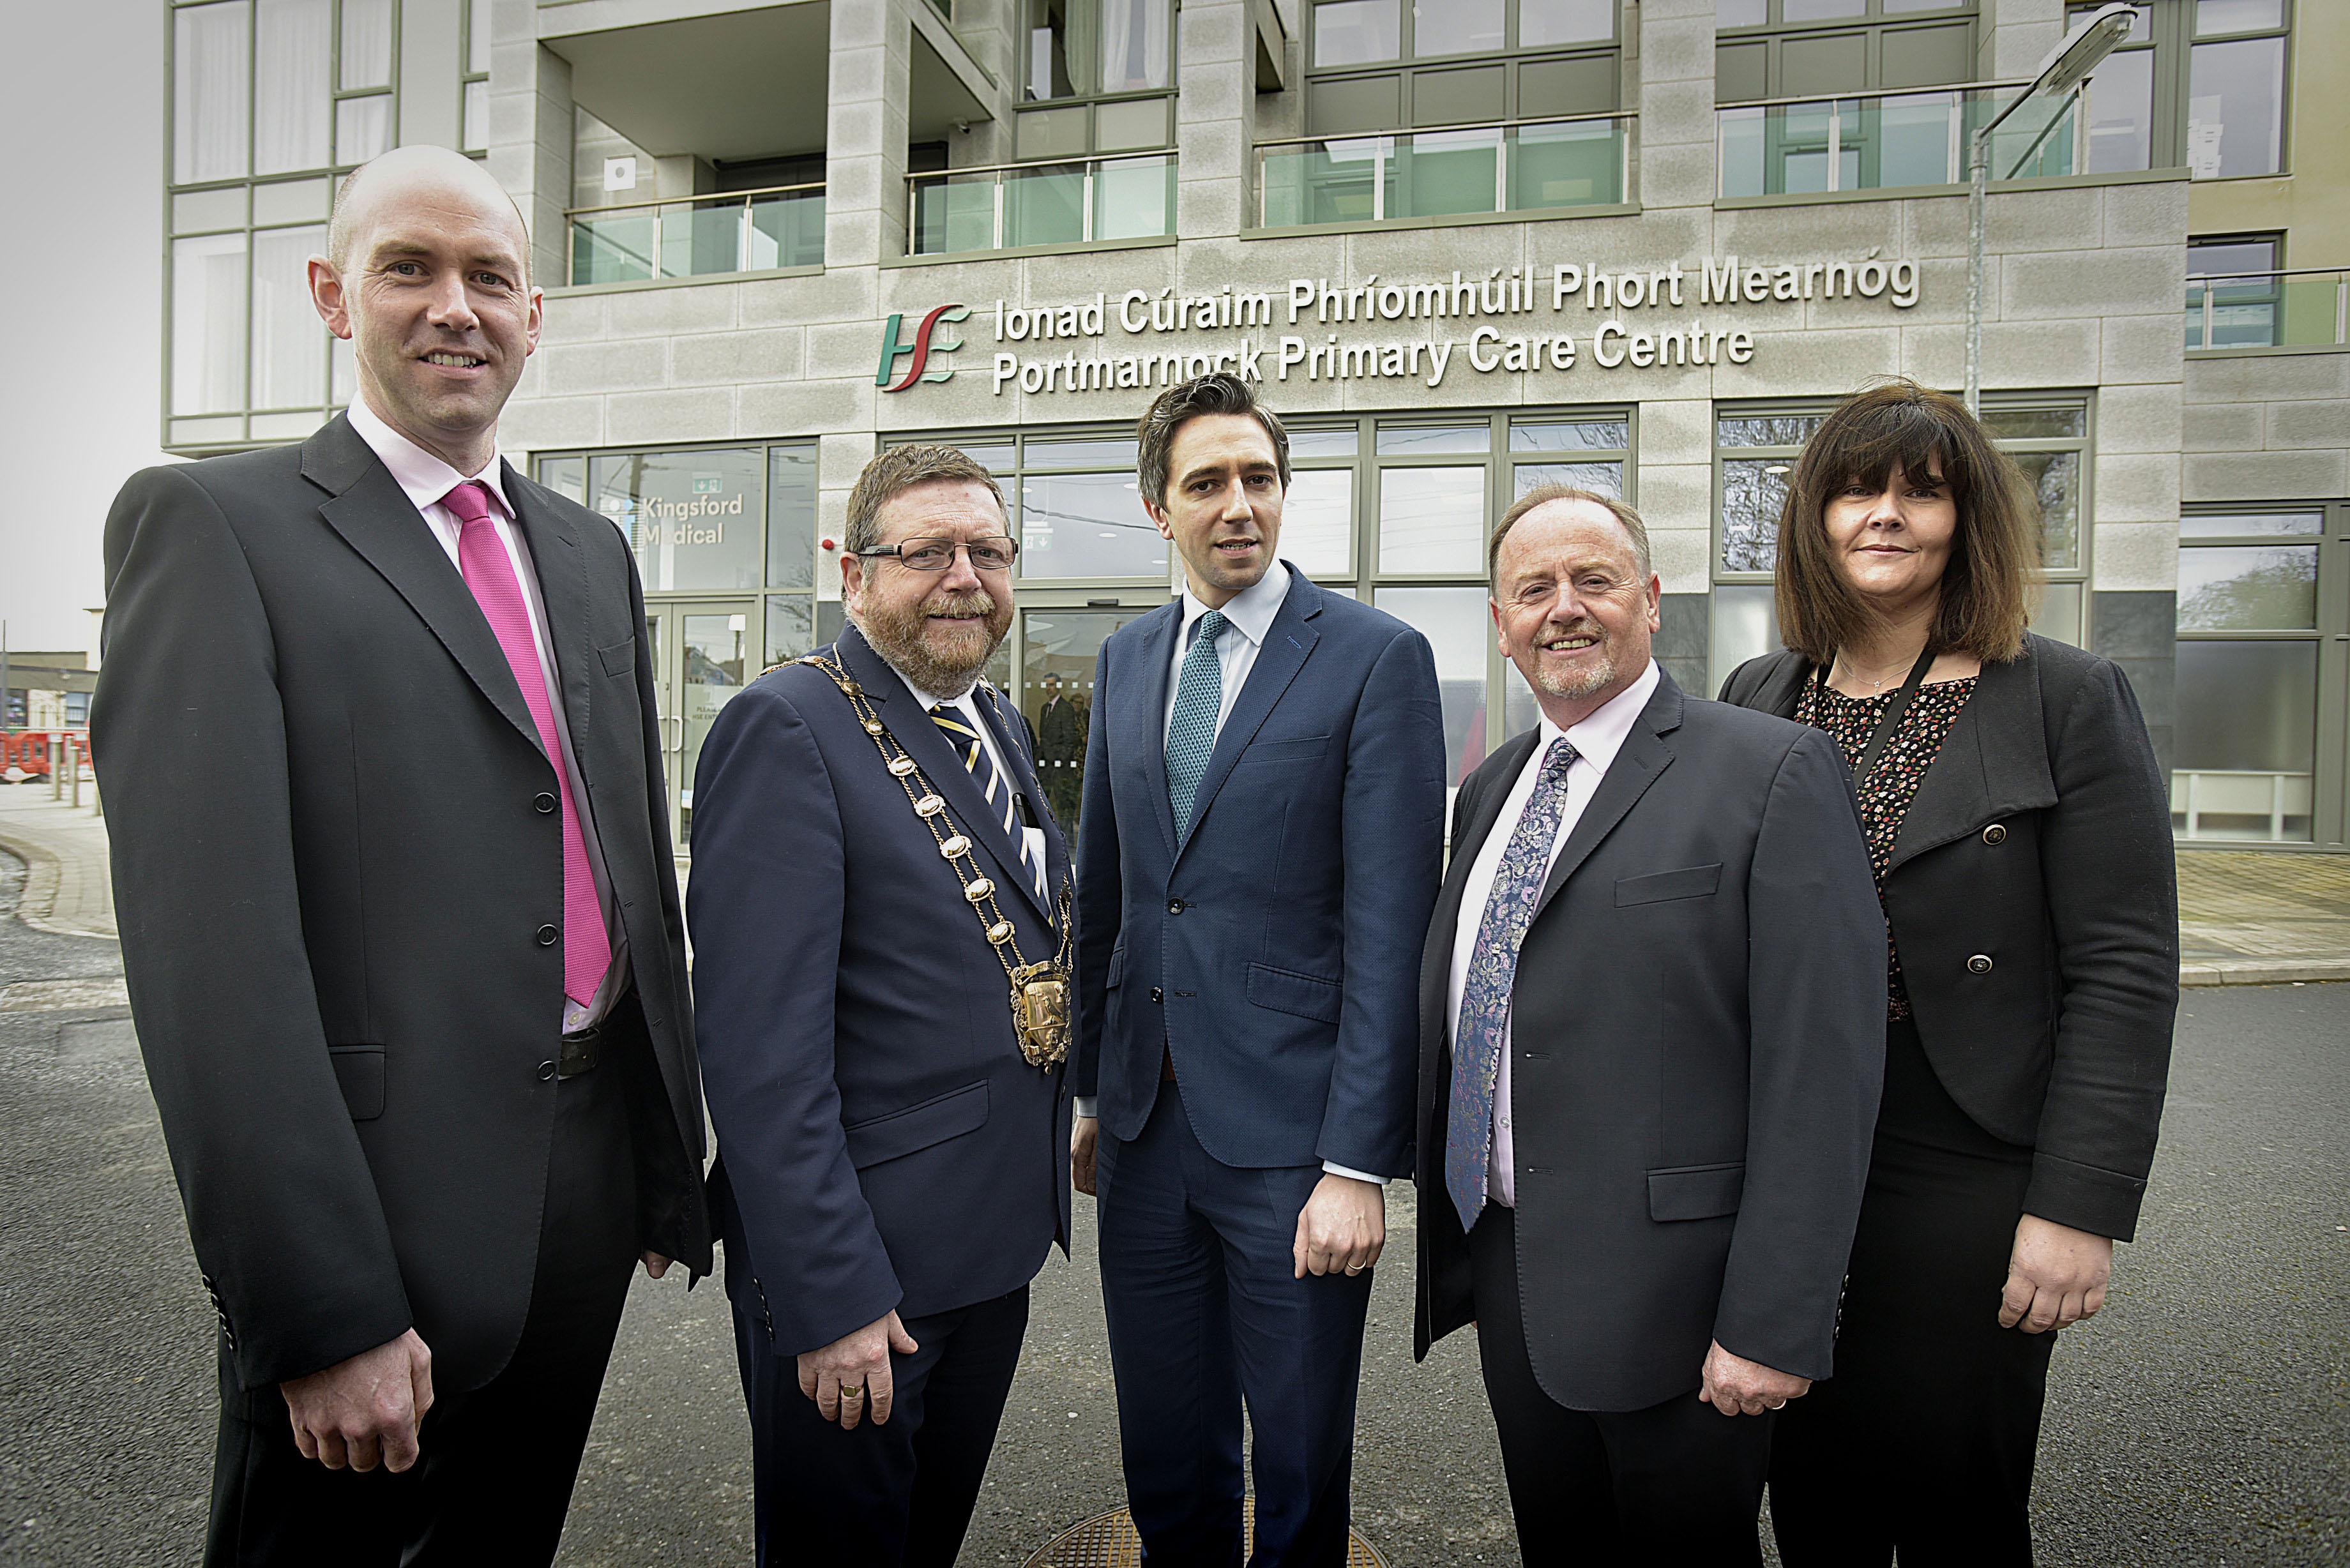 Minister For Health Simon Harris Td Opens Portmarnock Primary Care Centre Hse Ie